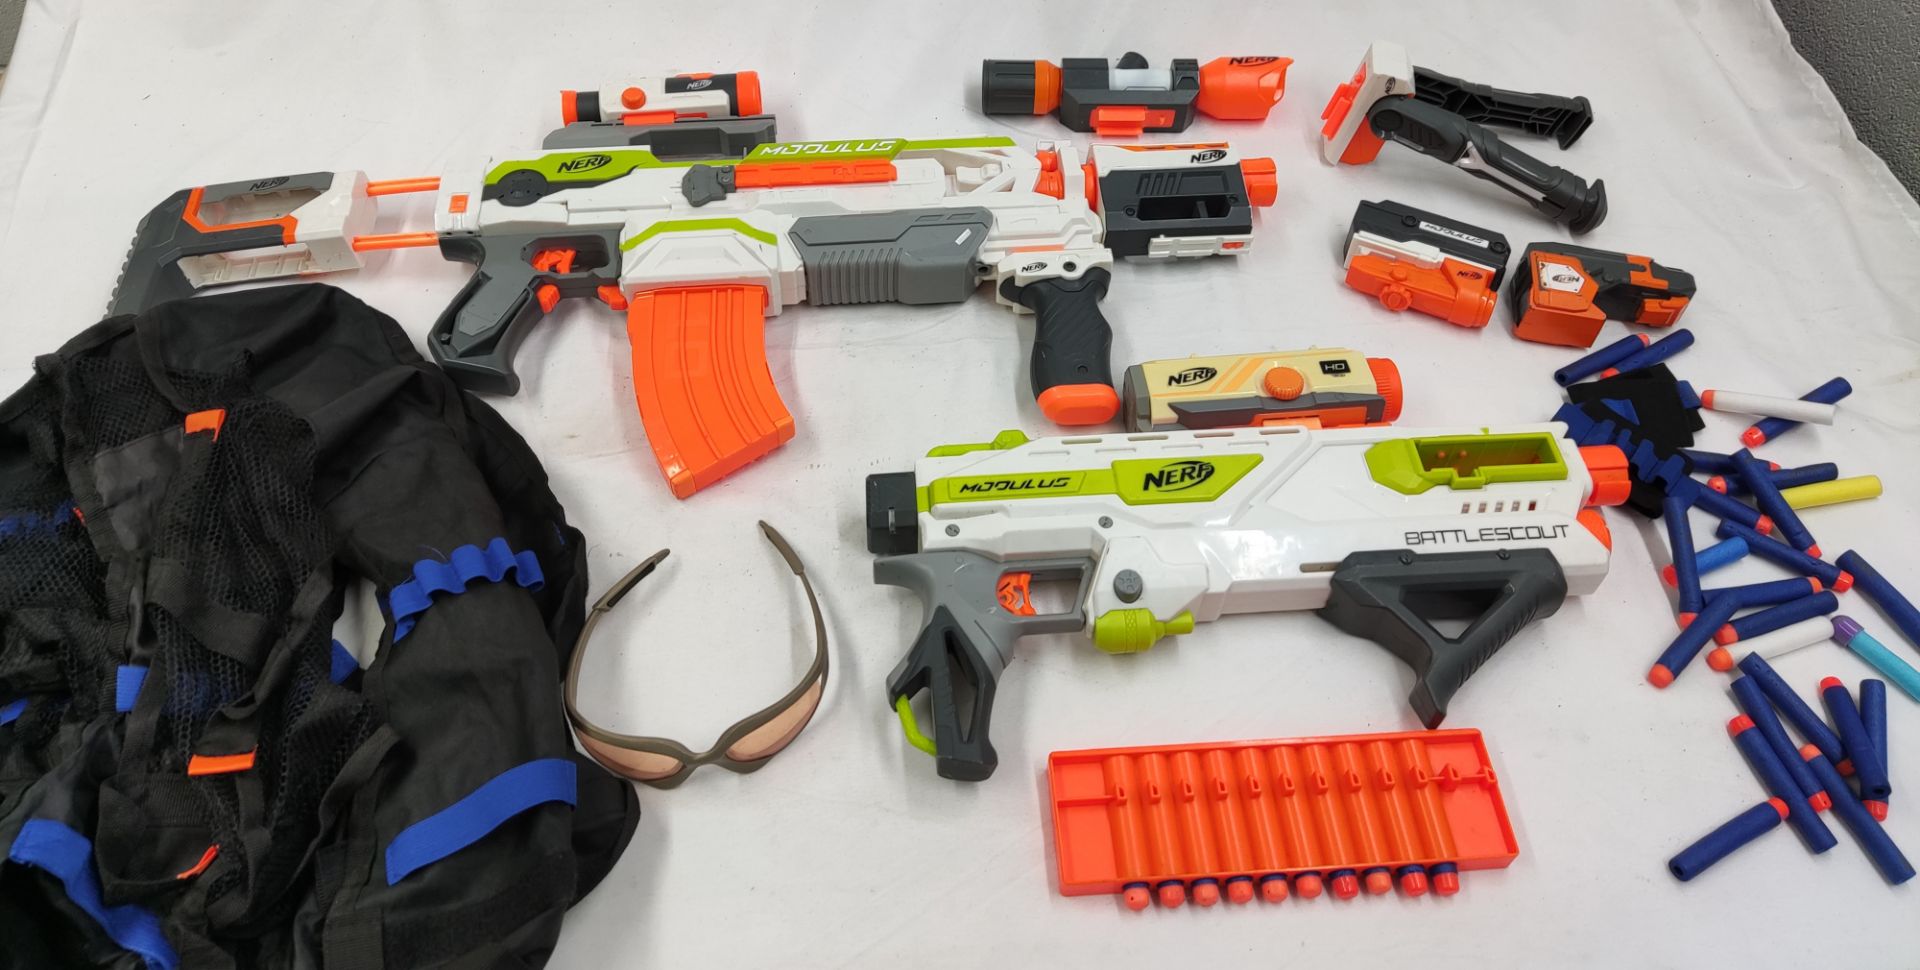 2 x Nerf Modulus Guns Plus Various Attachments And Accessories - Used - CL444 - NO VAT ON THE HAMMER - Image 9 of 10